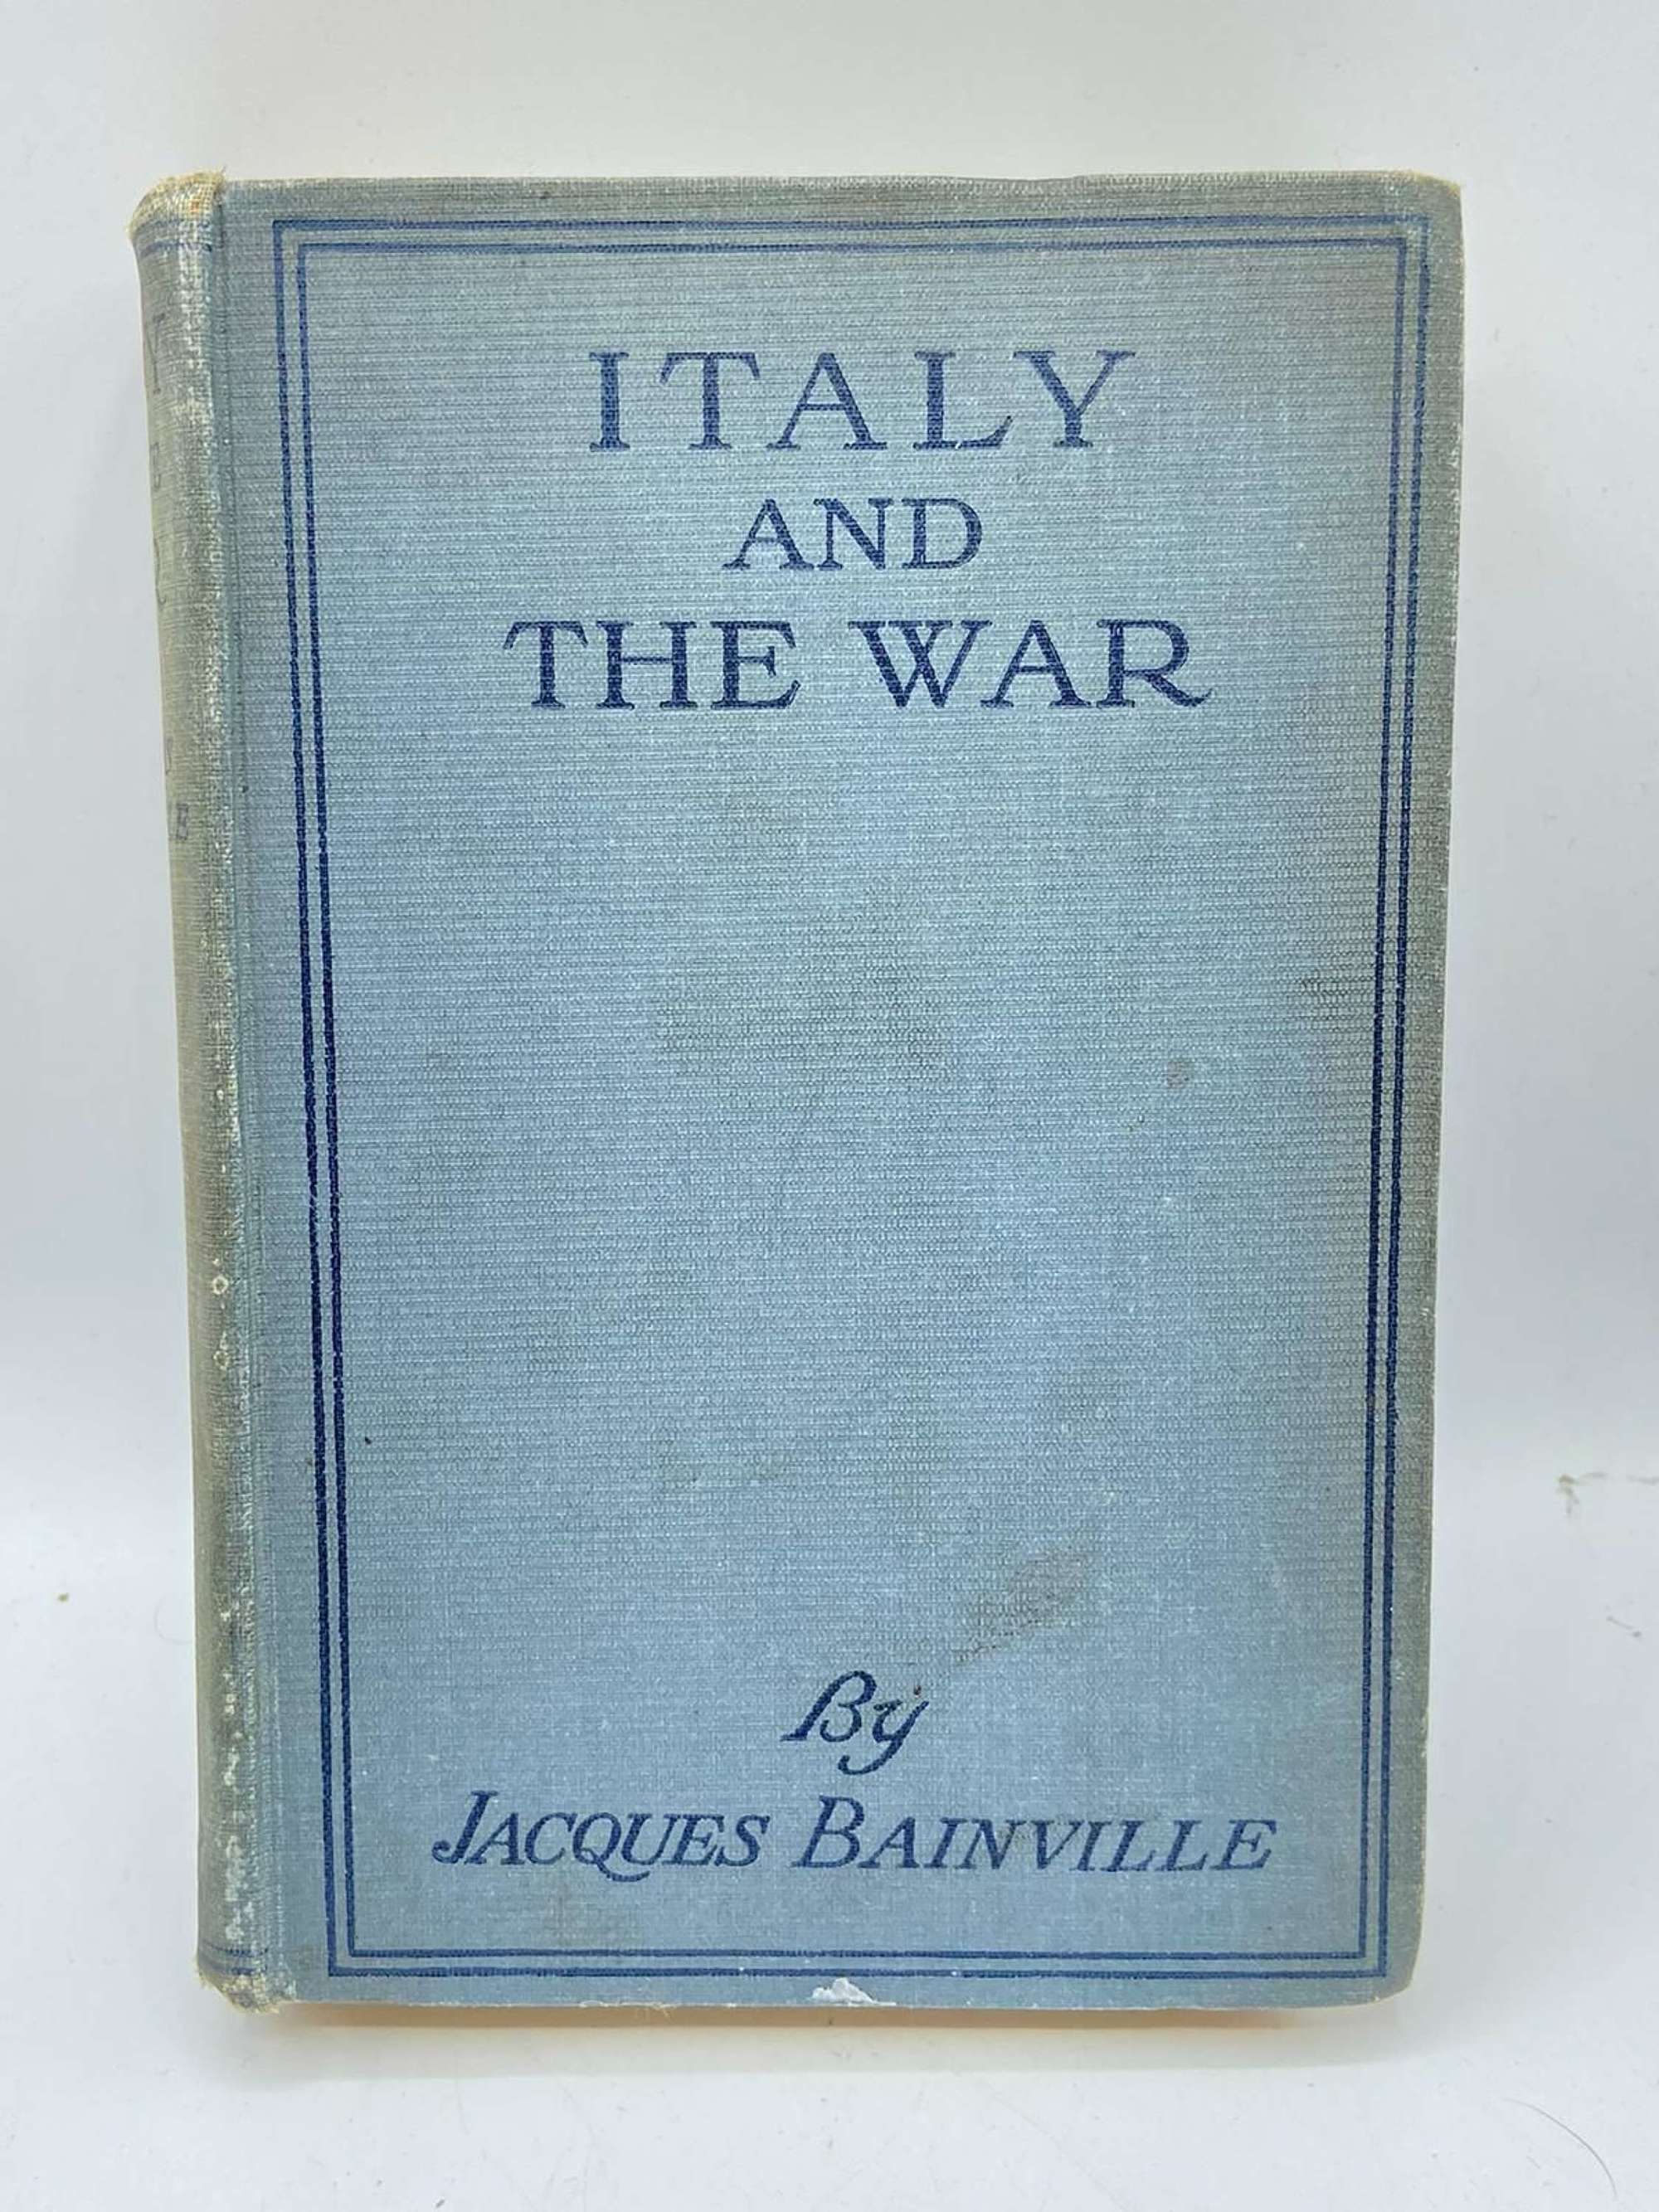 WW1 Italy And The War By Jacques Bainville 1916 Publication